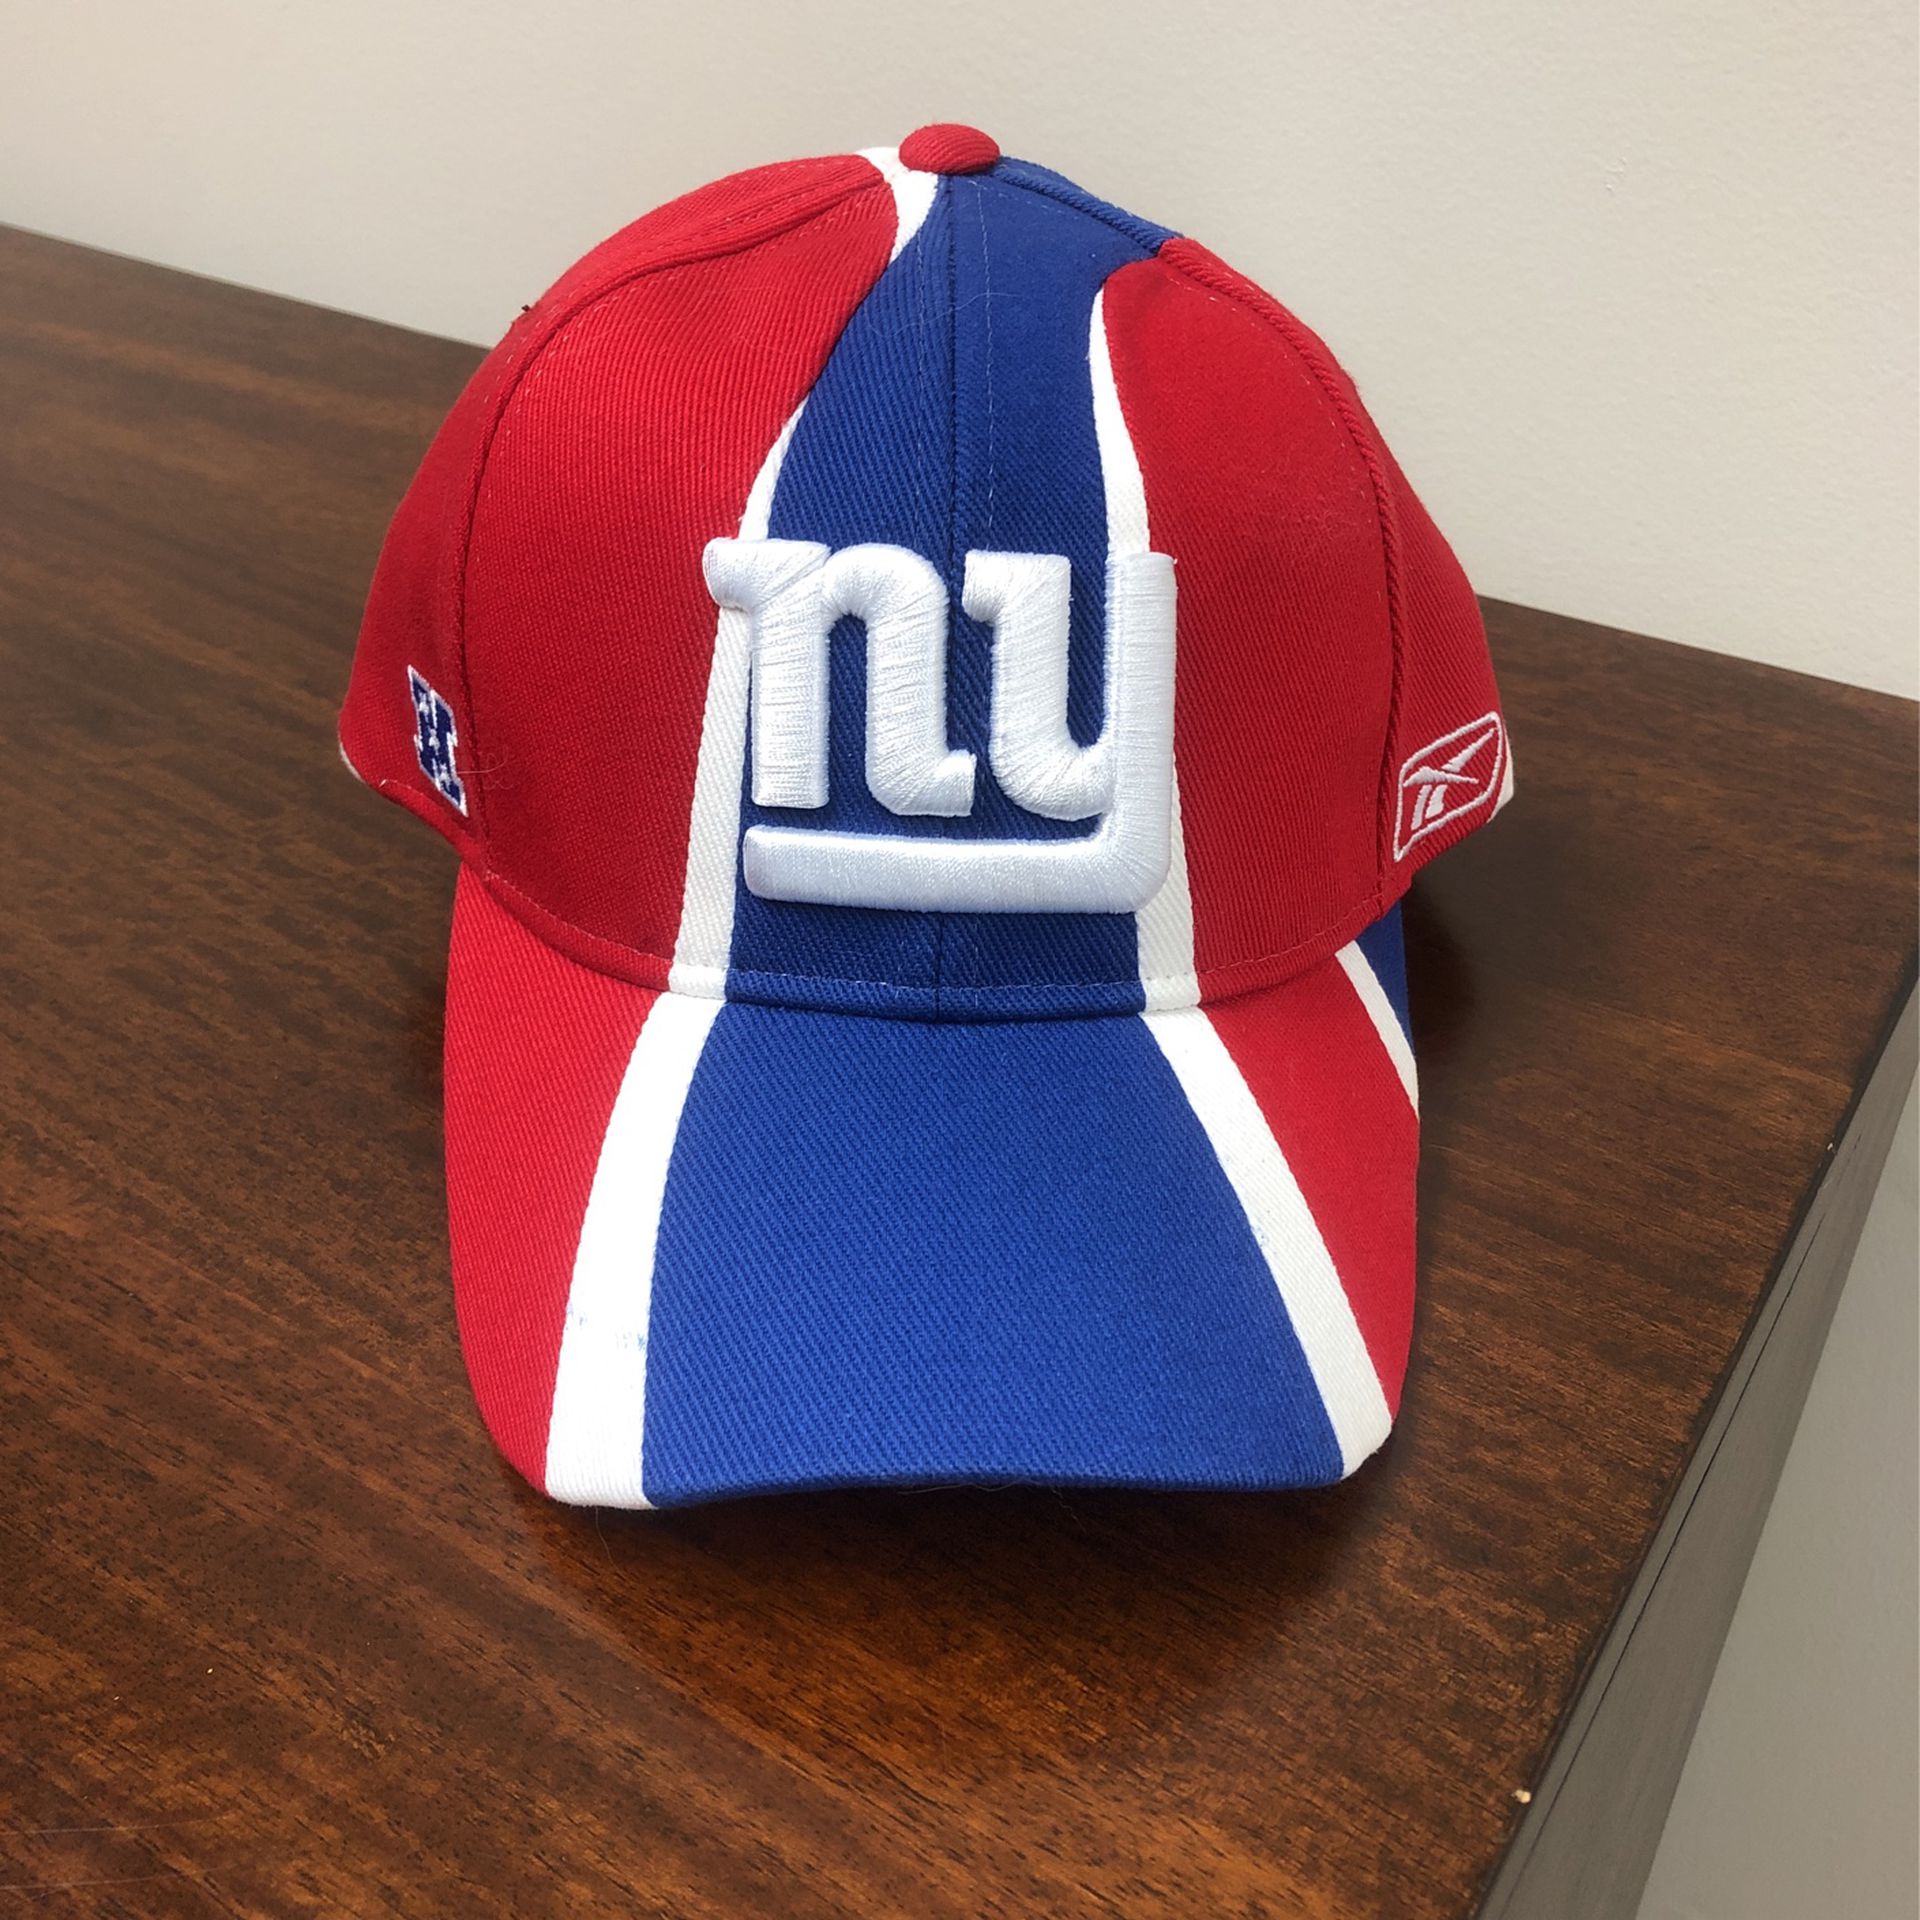 Reebok NY Giants Adjustable Hat   Brand New With Tags